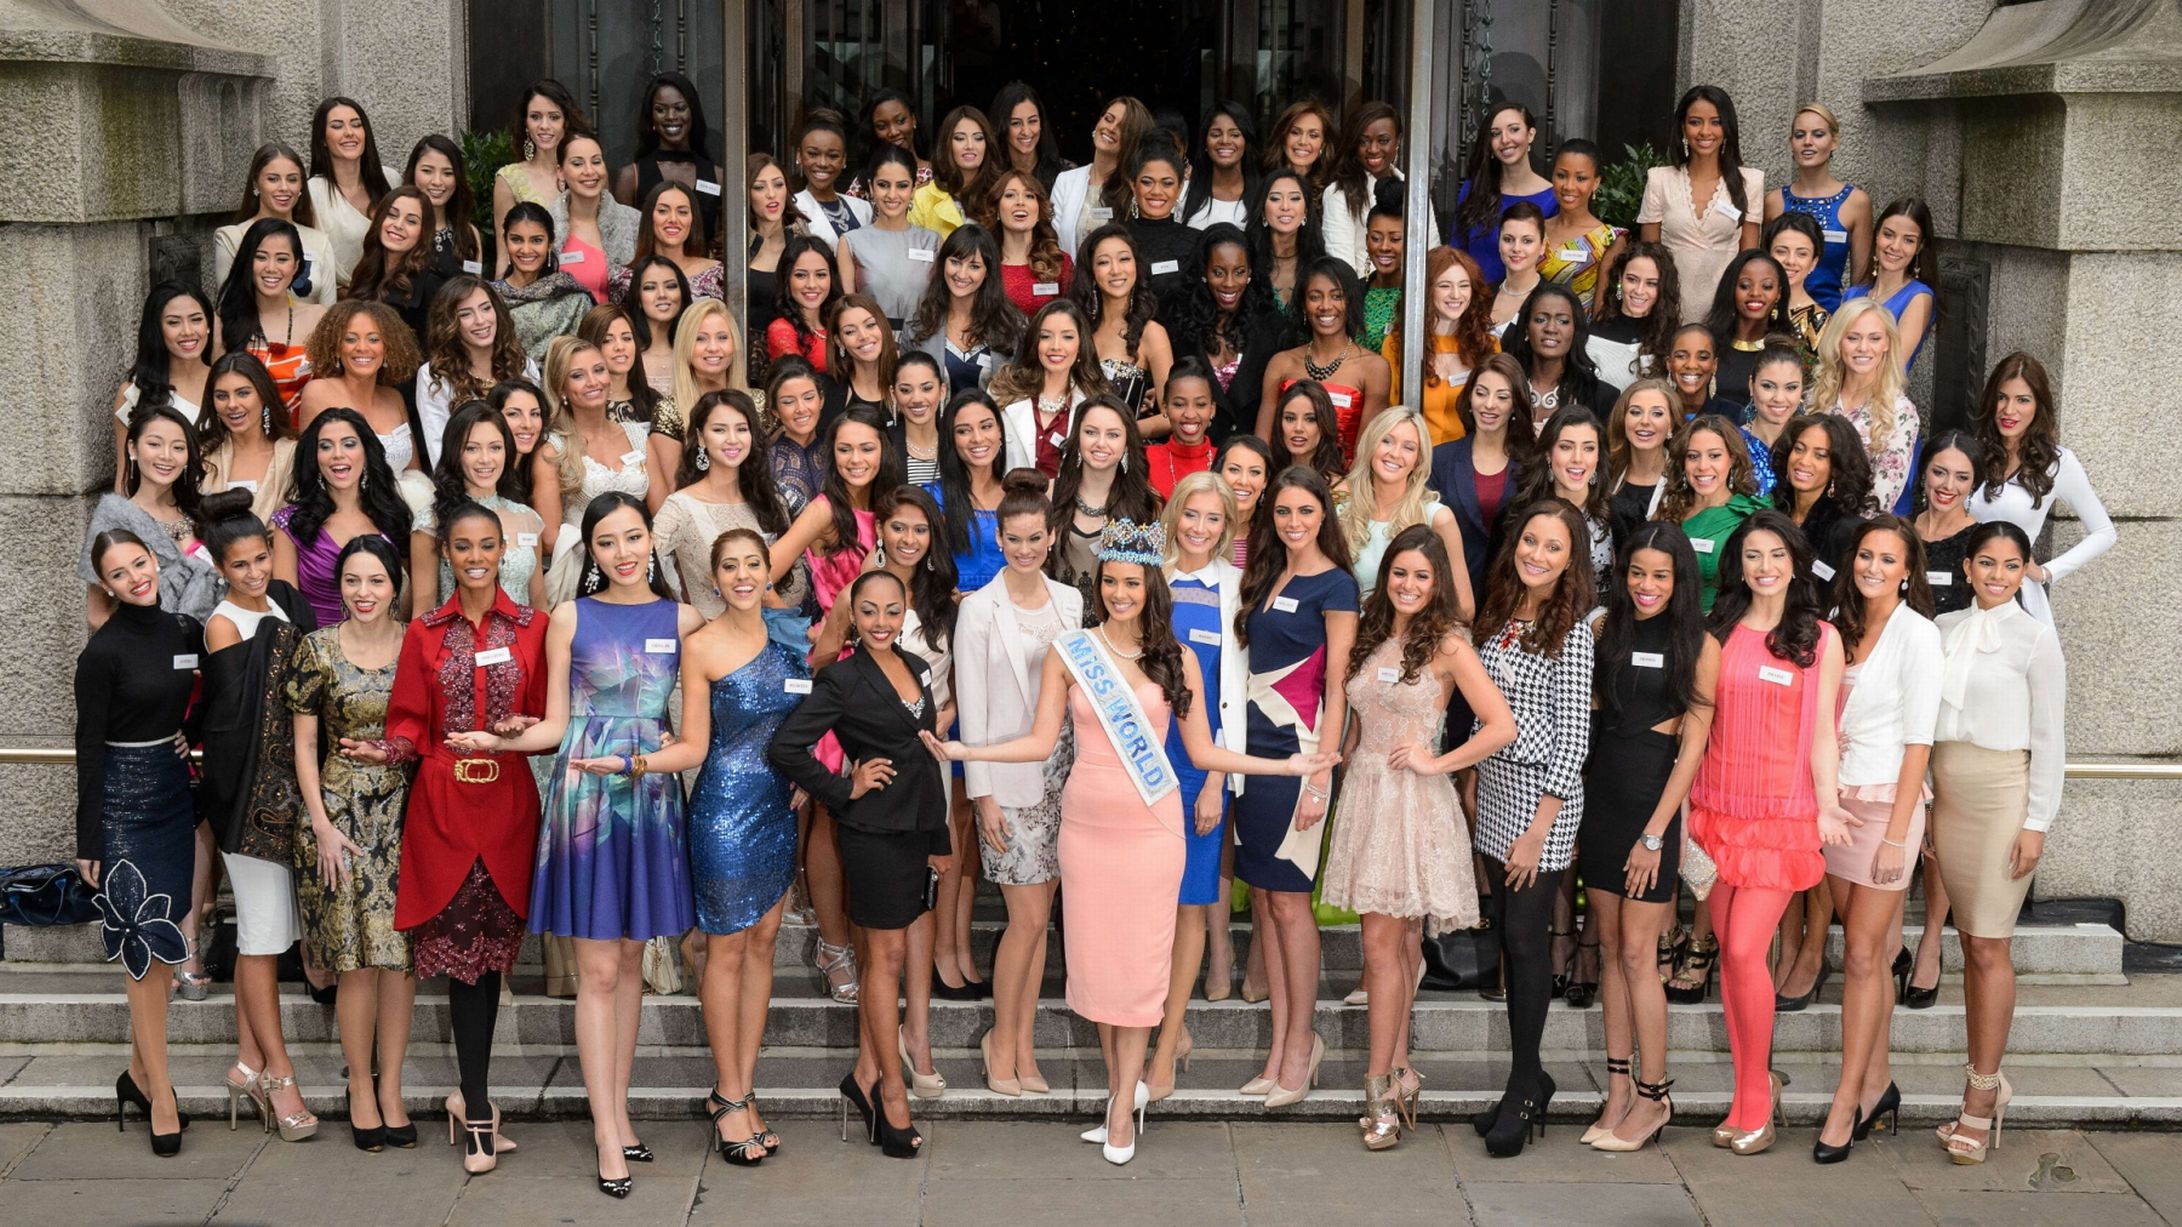 ♚♚♚ MISS WORLD 2014 COVERAGE ♚♚♚ - Top 5 Challenge Event Announcements - Page 9 Miss-World-2014-contestants